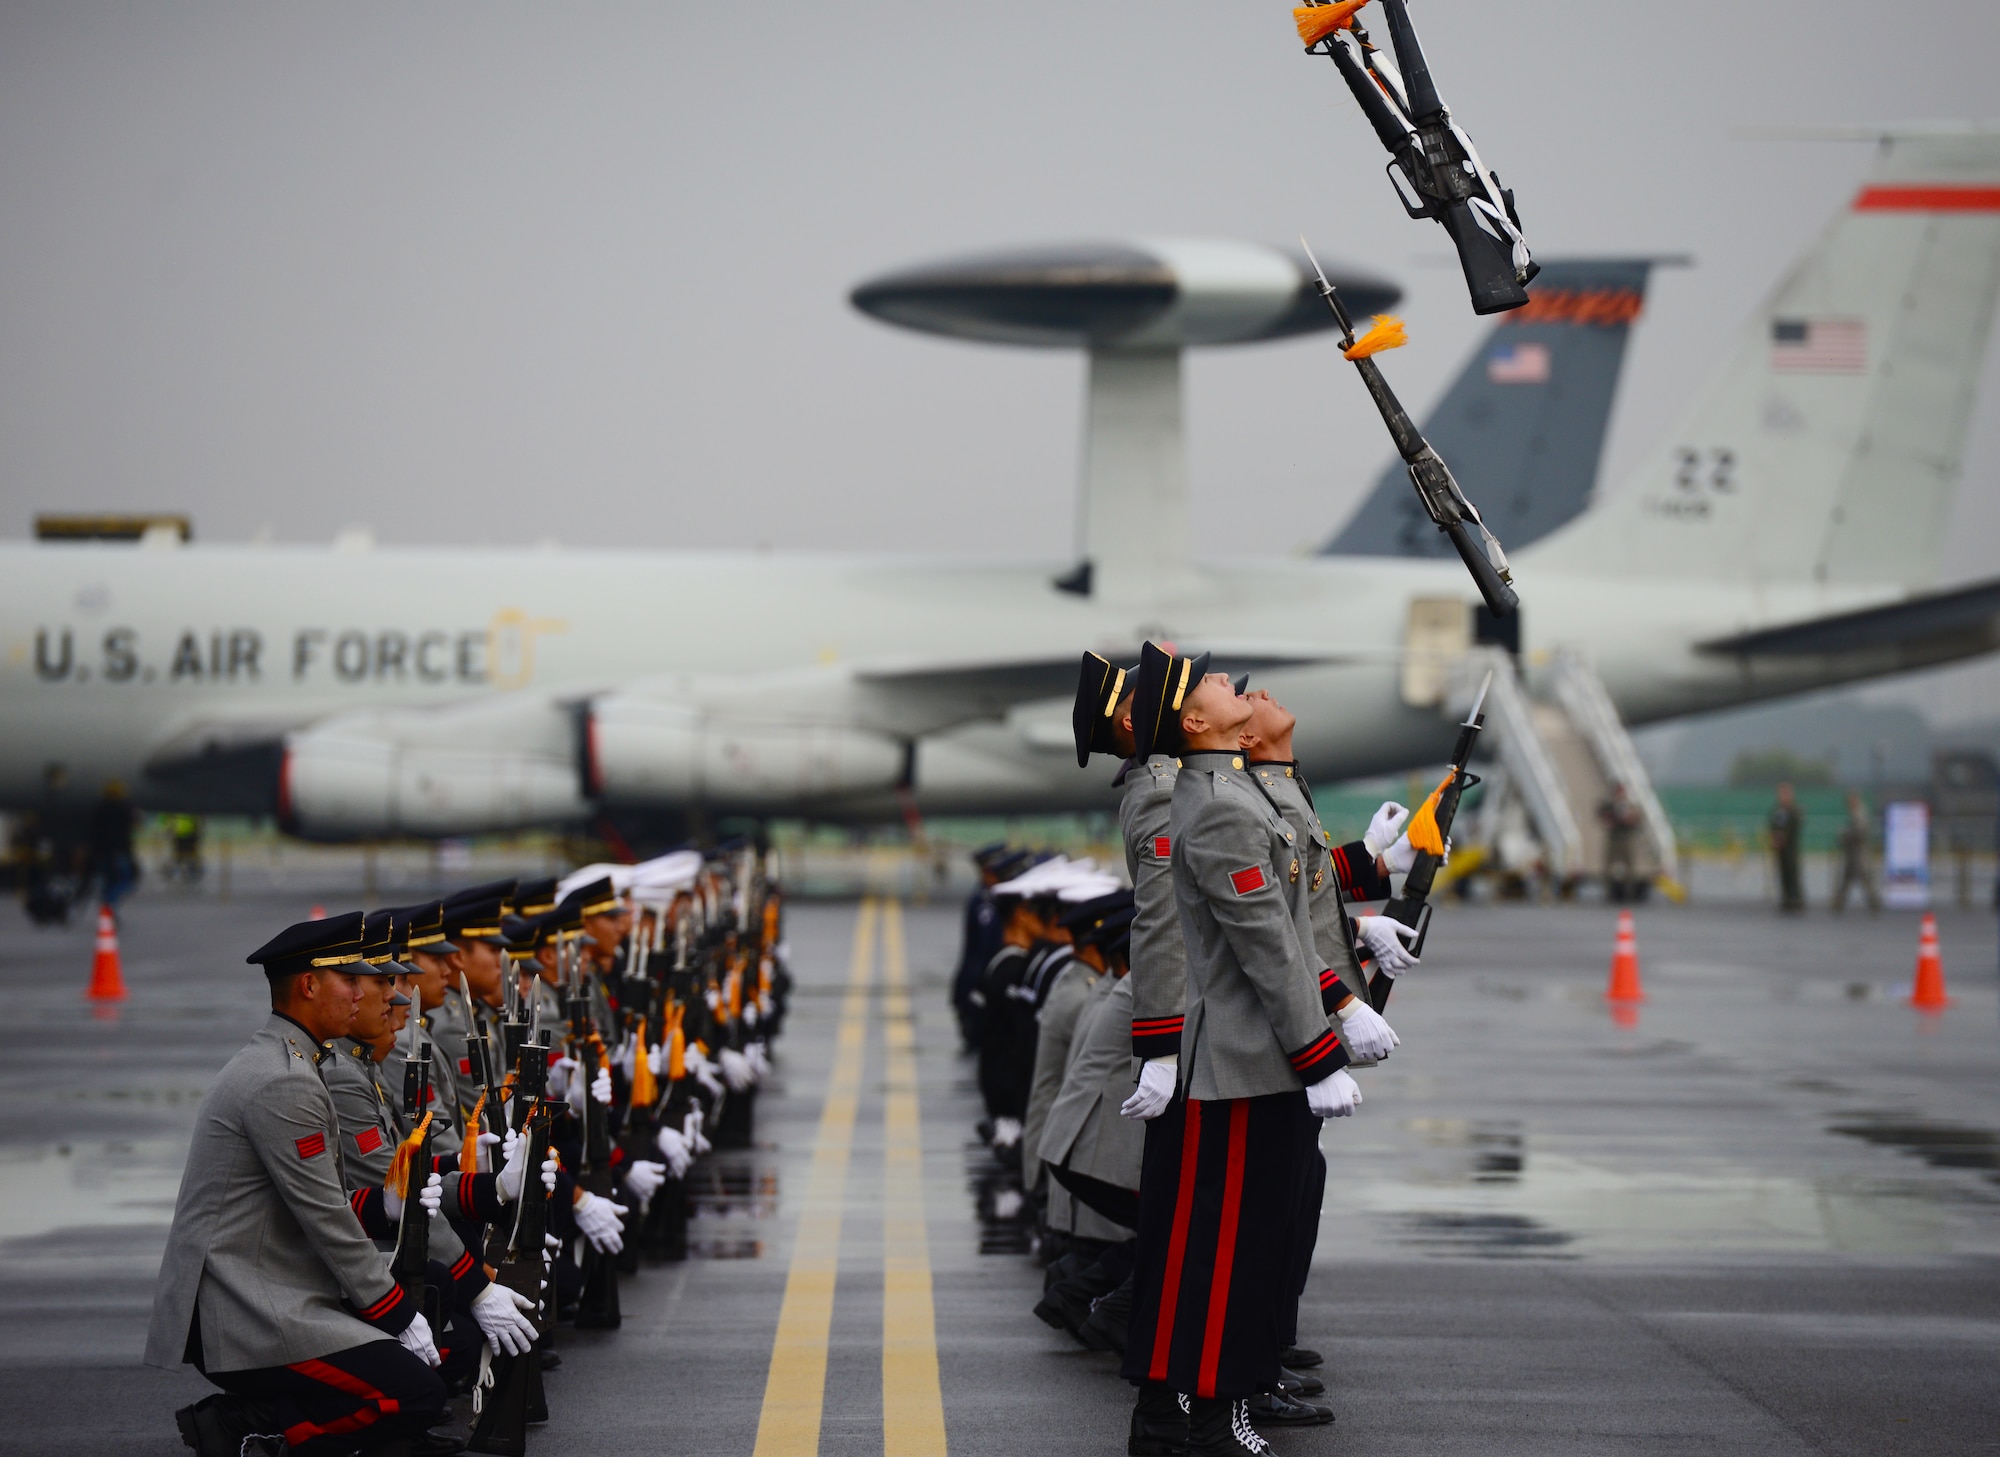 The 2015 Seoul International Aerospace and Defense Exhibition opened to the public with a colorful display of cultural history combined with regimented military drill at the Seoul Airport, South Korea, Oct. 24th, 2015. Combining the past and the present in an intricate dance of tradition and strength, the people of South Korea showcased their honored legacies to the delight of the gathered crowds. (U.S. Air Force photo/Staff Sgt. Amber Grimm)